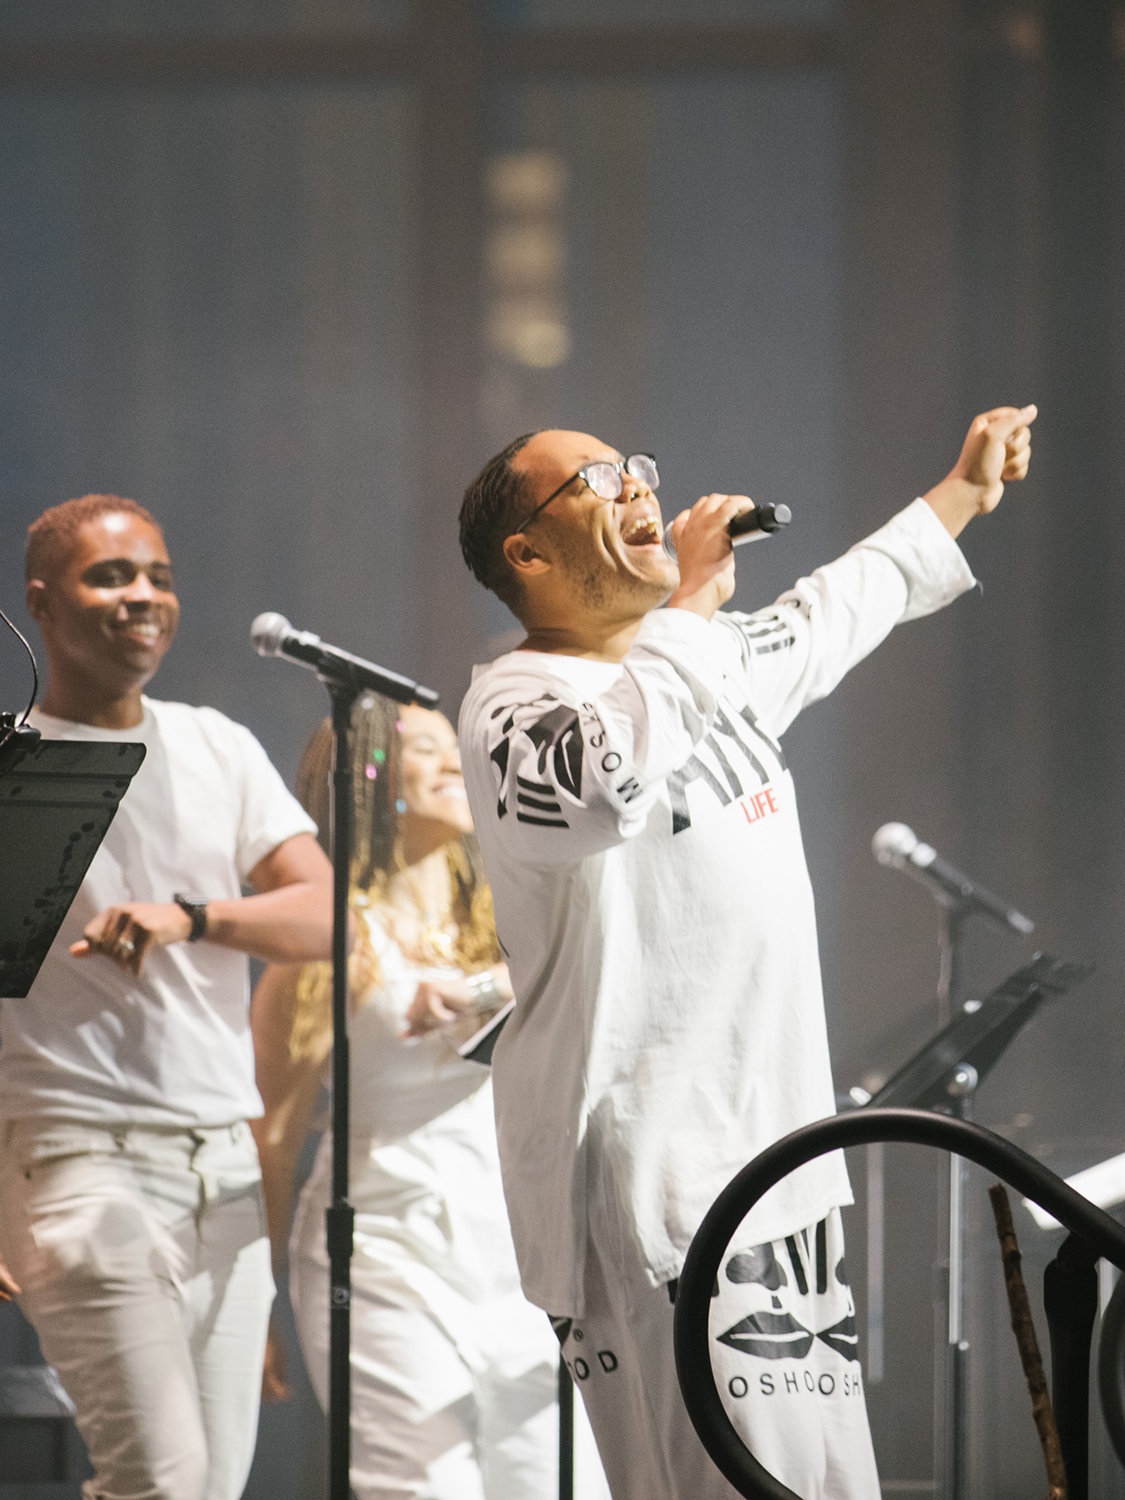 The artist Troy Anthony singing with arms outstretched in front of other performers. They all wear white costumes. 